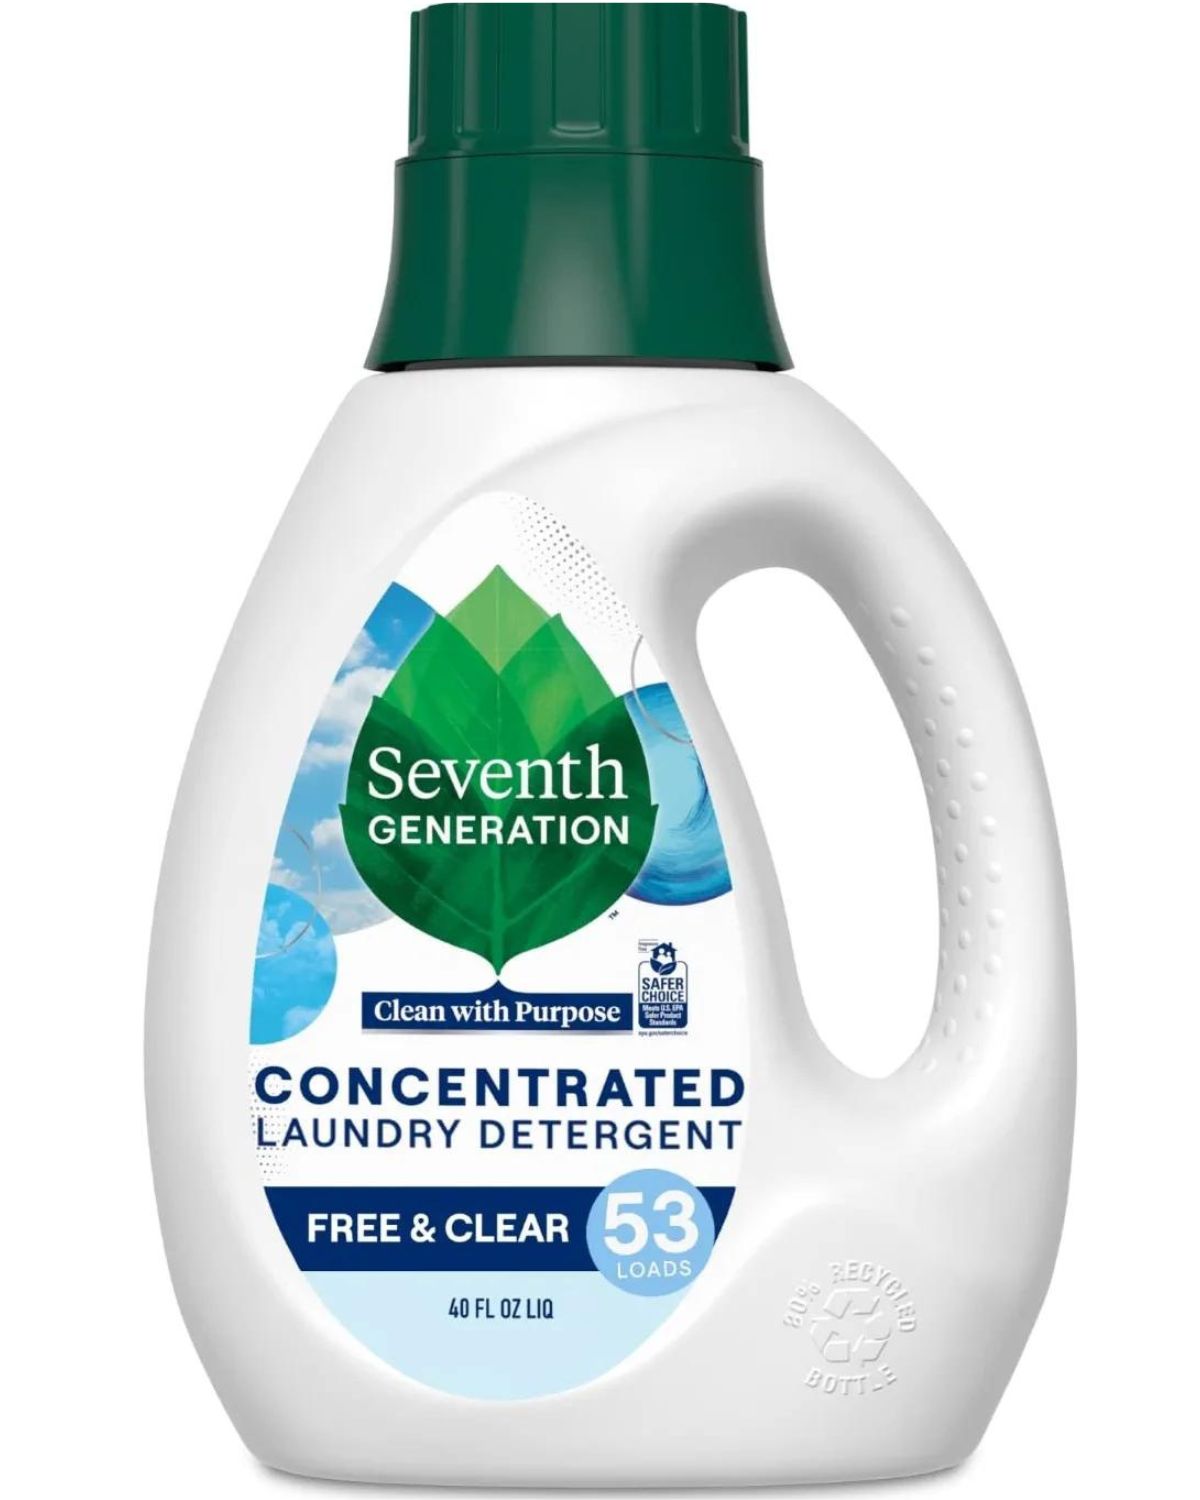 Seventh generation free and clear 40oz bottle